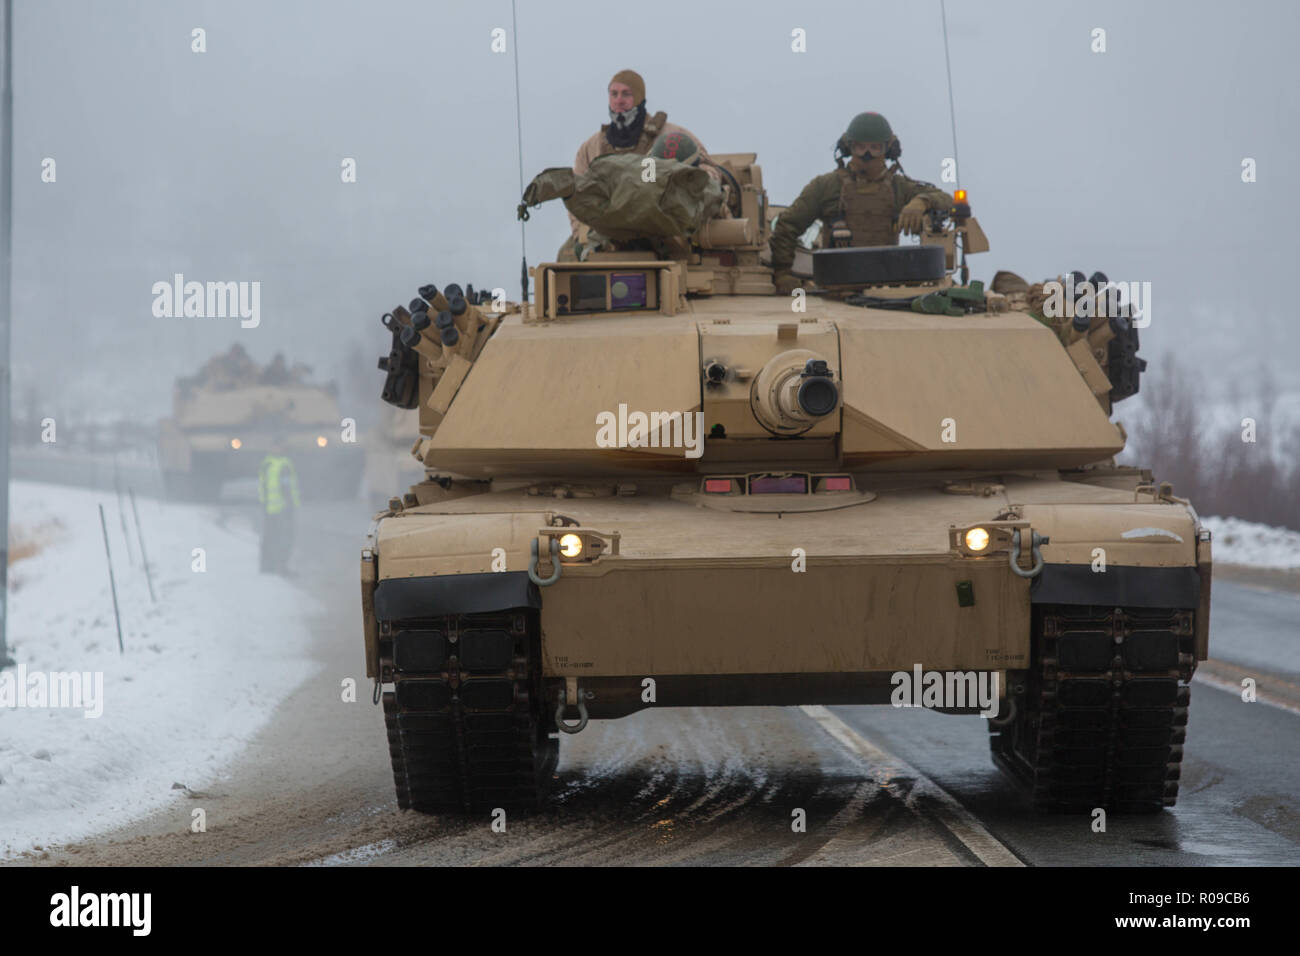 Molde Fjords, Norway. 01st Nov, 2018. U.S. Marines with 2nd Tank Battalion, 2nd Marine Division, in a convoy of M1A1 Abrams Battle Tanks during Exercise Trident Juncture 18 November 2, 2018 in Hjerkinn, Norway. The multi-national exercise is the largest NATO exercise since 2015, and includes more than 50,000 military members from 31 countries. Credit: Planetpix/Alamy Live News Stock Photo